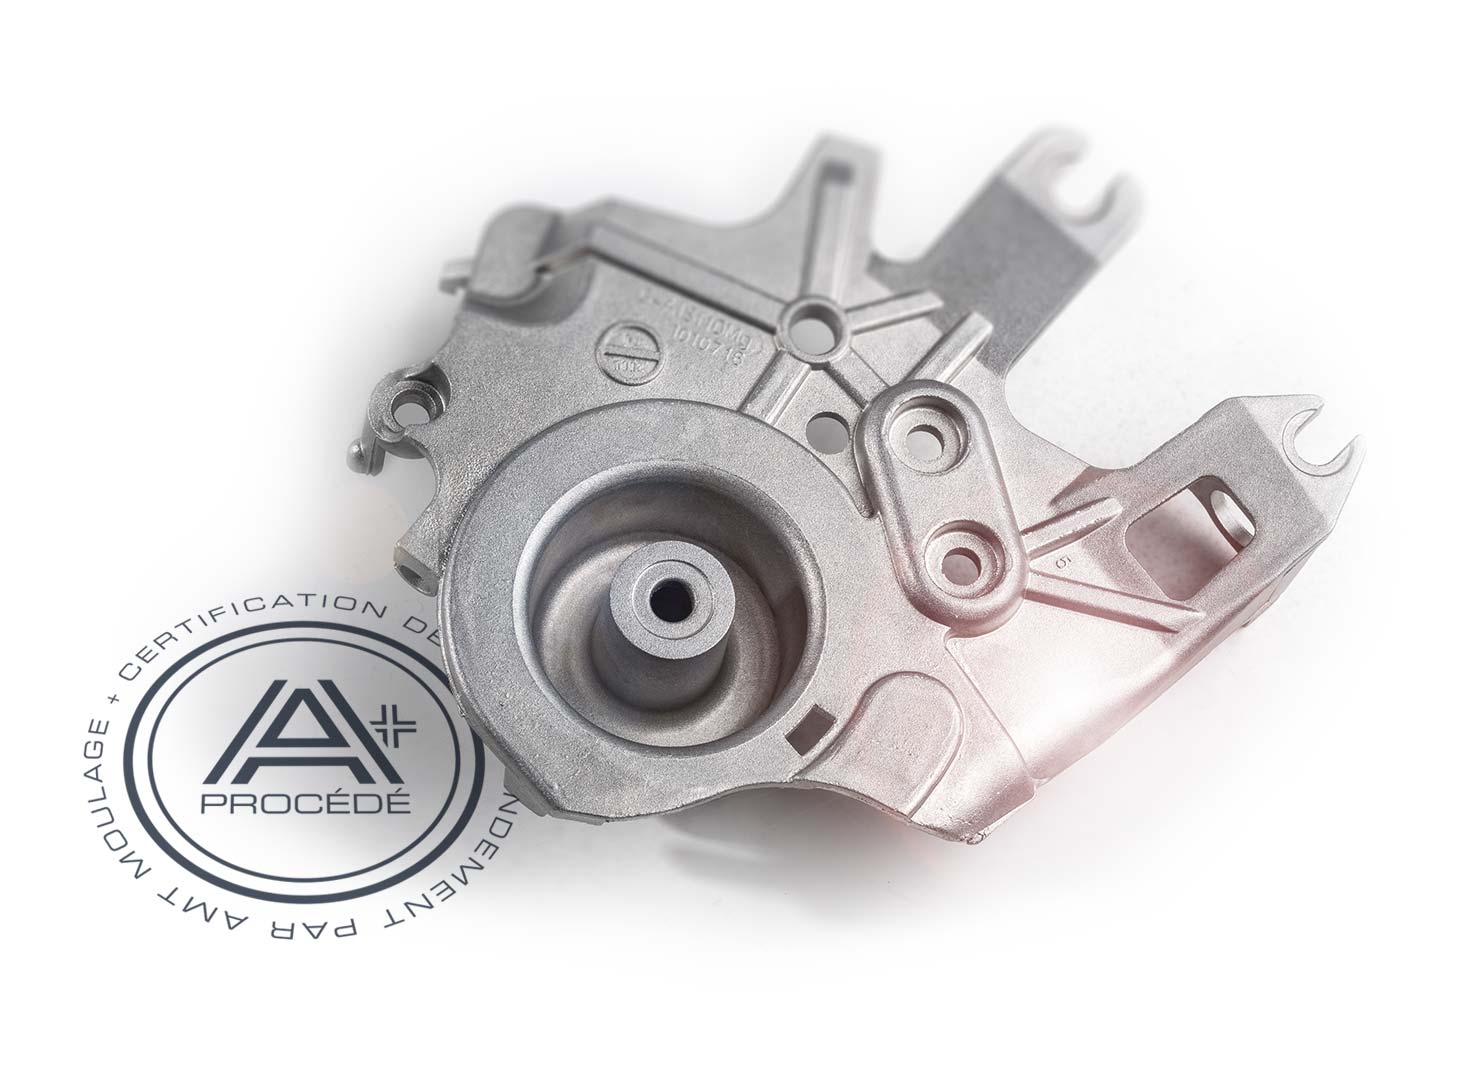 AMT-diecasted-aluminum-parts-automotive-industry